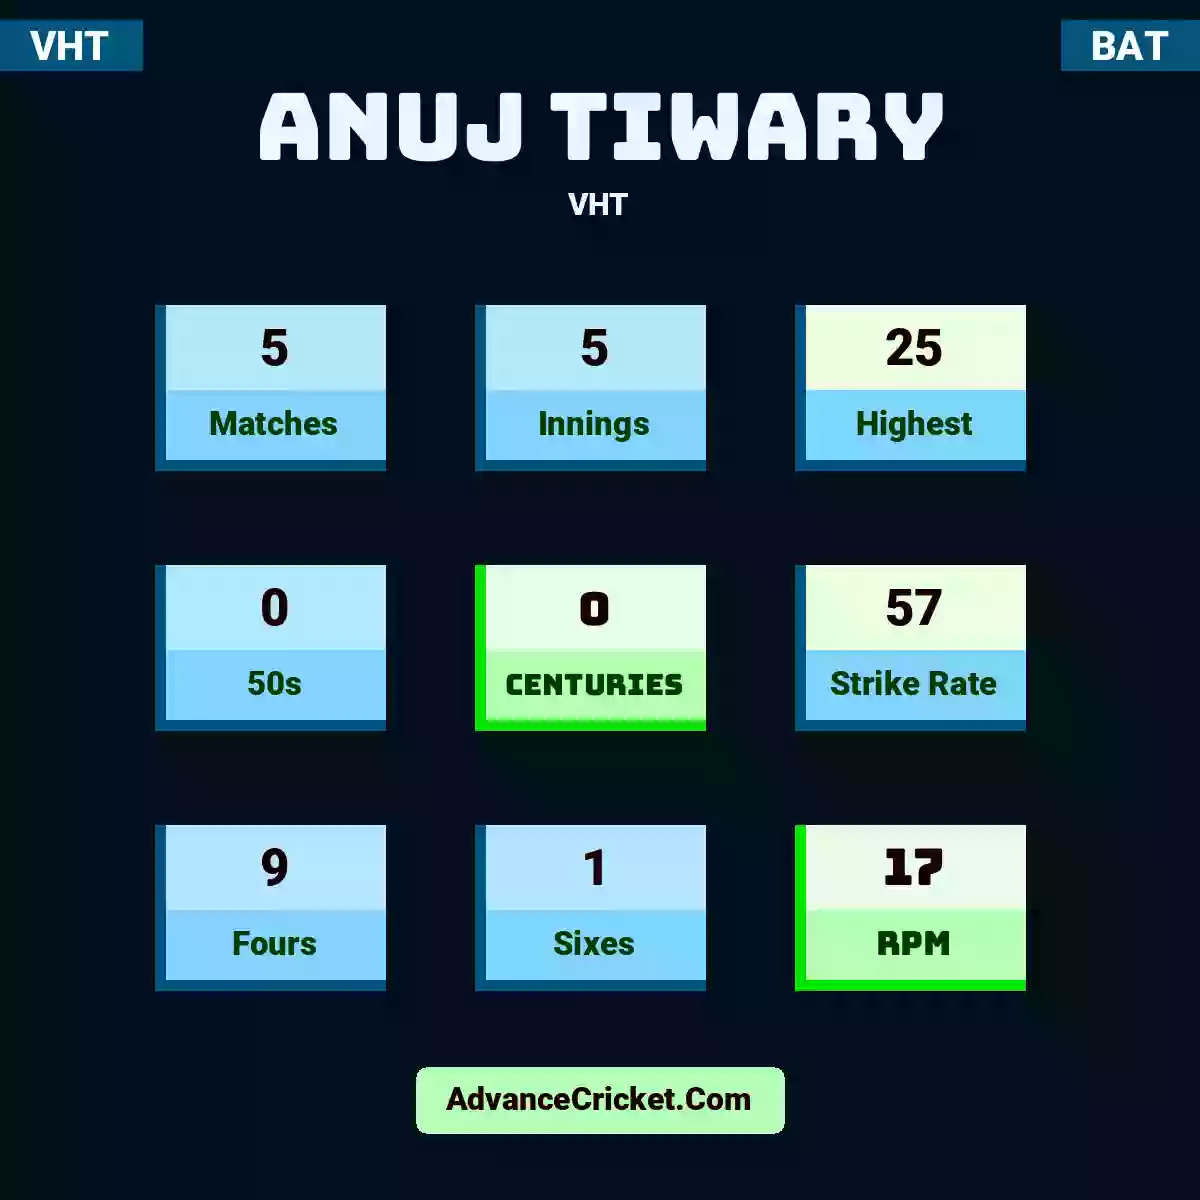 Anuj Tiwary VHT , Anuj Tiwary played 5 matches, scored 25 runs as highest, 0 half-centuries, and 0 centuries, with a strike rate of 57. A.Tiwary hit 9 fours and 1 sixes, with an RPM of 17.